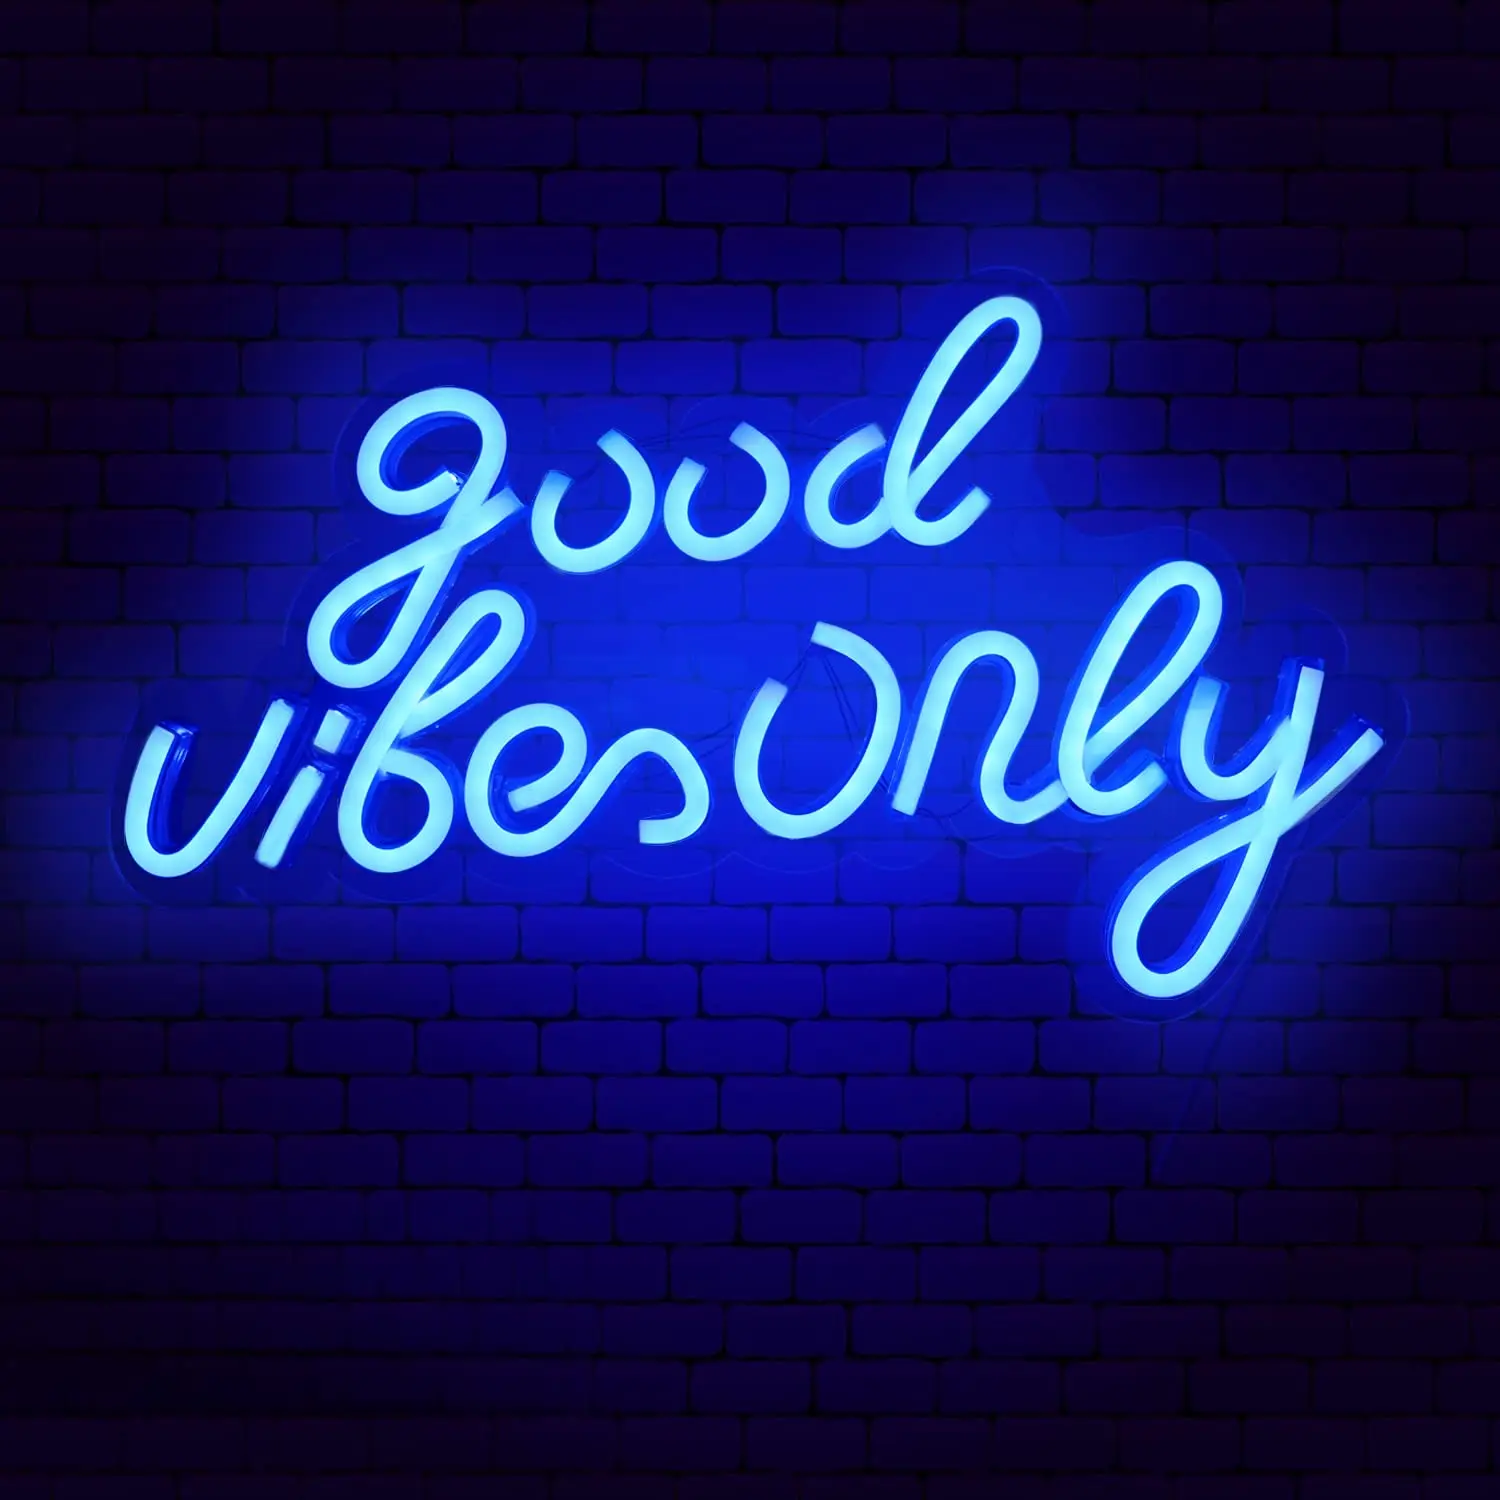 Custom Neon Sign Good Vibes Only Blue Pink Lights Acrylic Board Decor Wall Hanging LED Signs Lamps for Party Bar Game Room